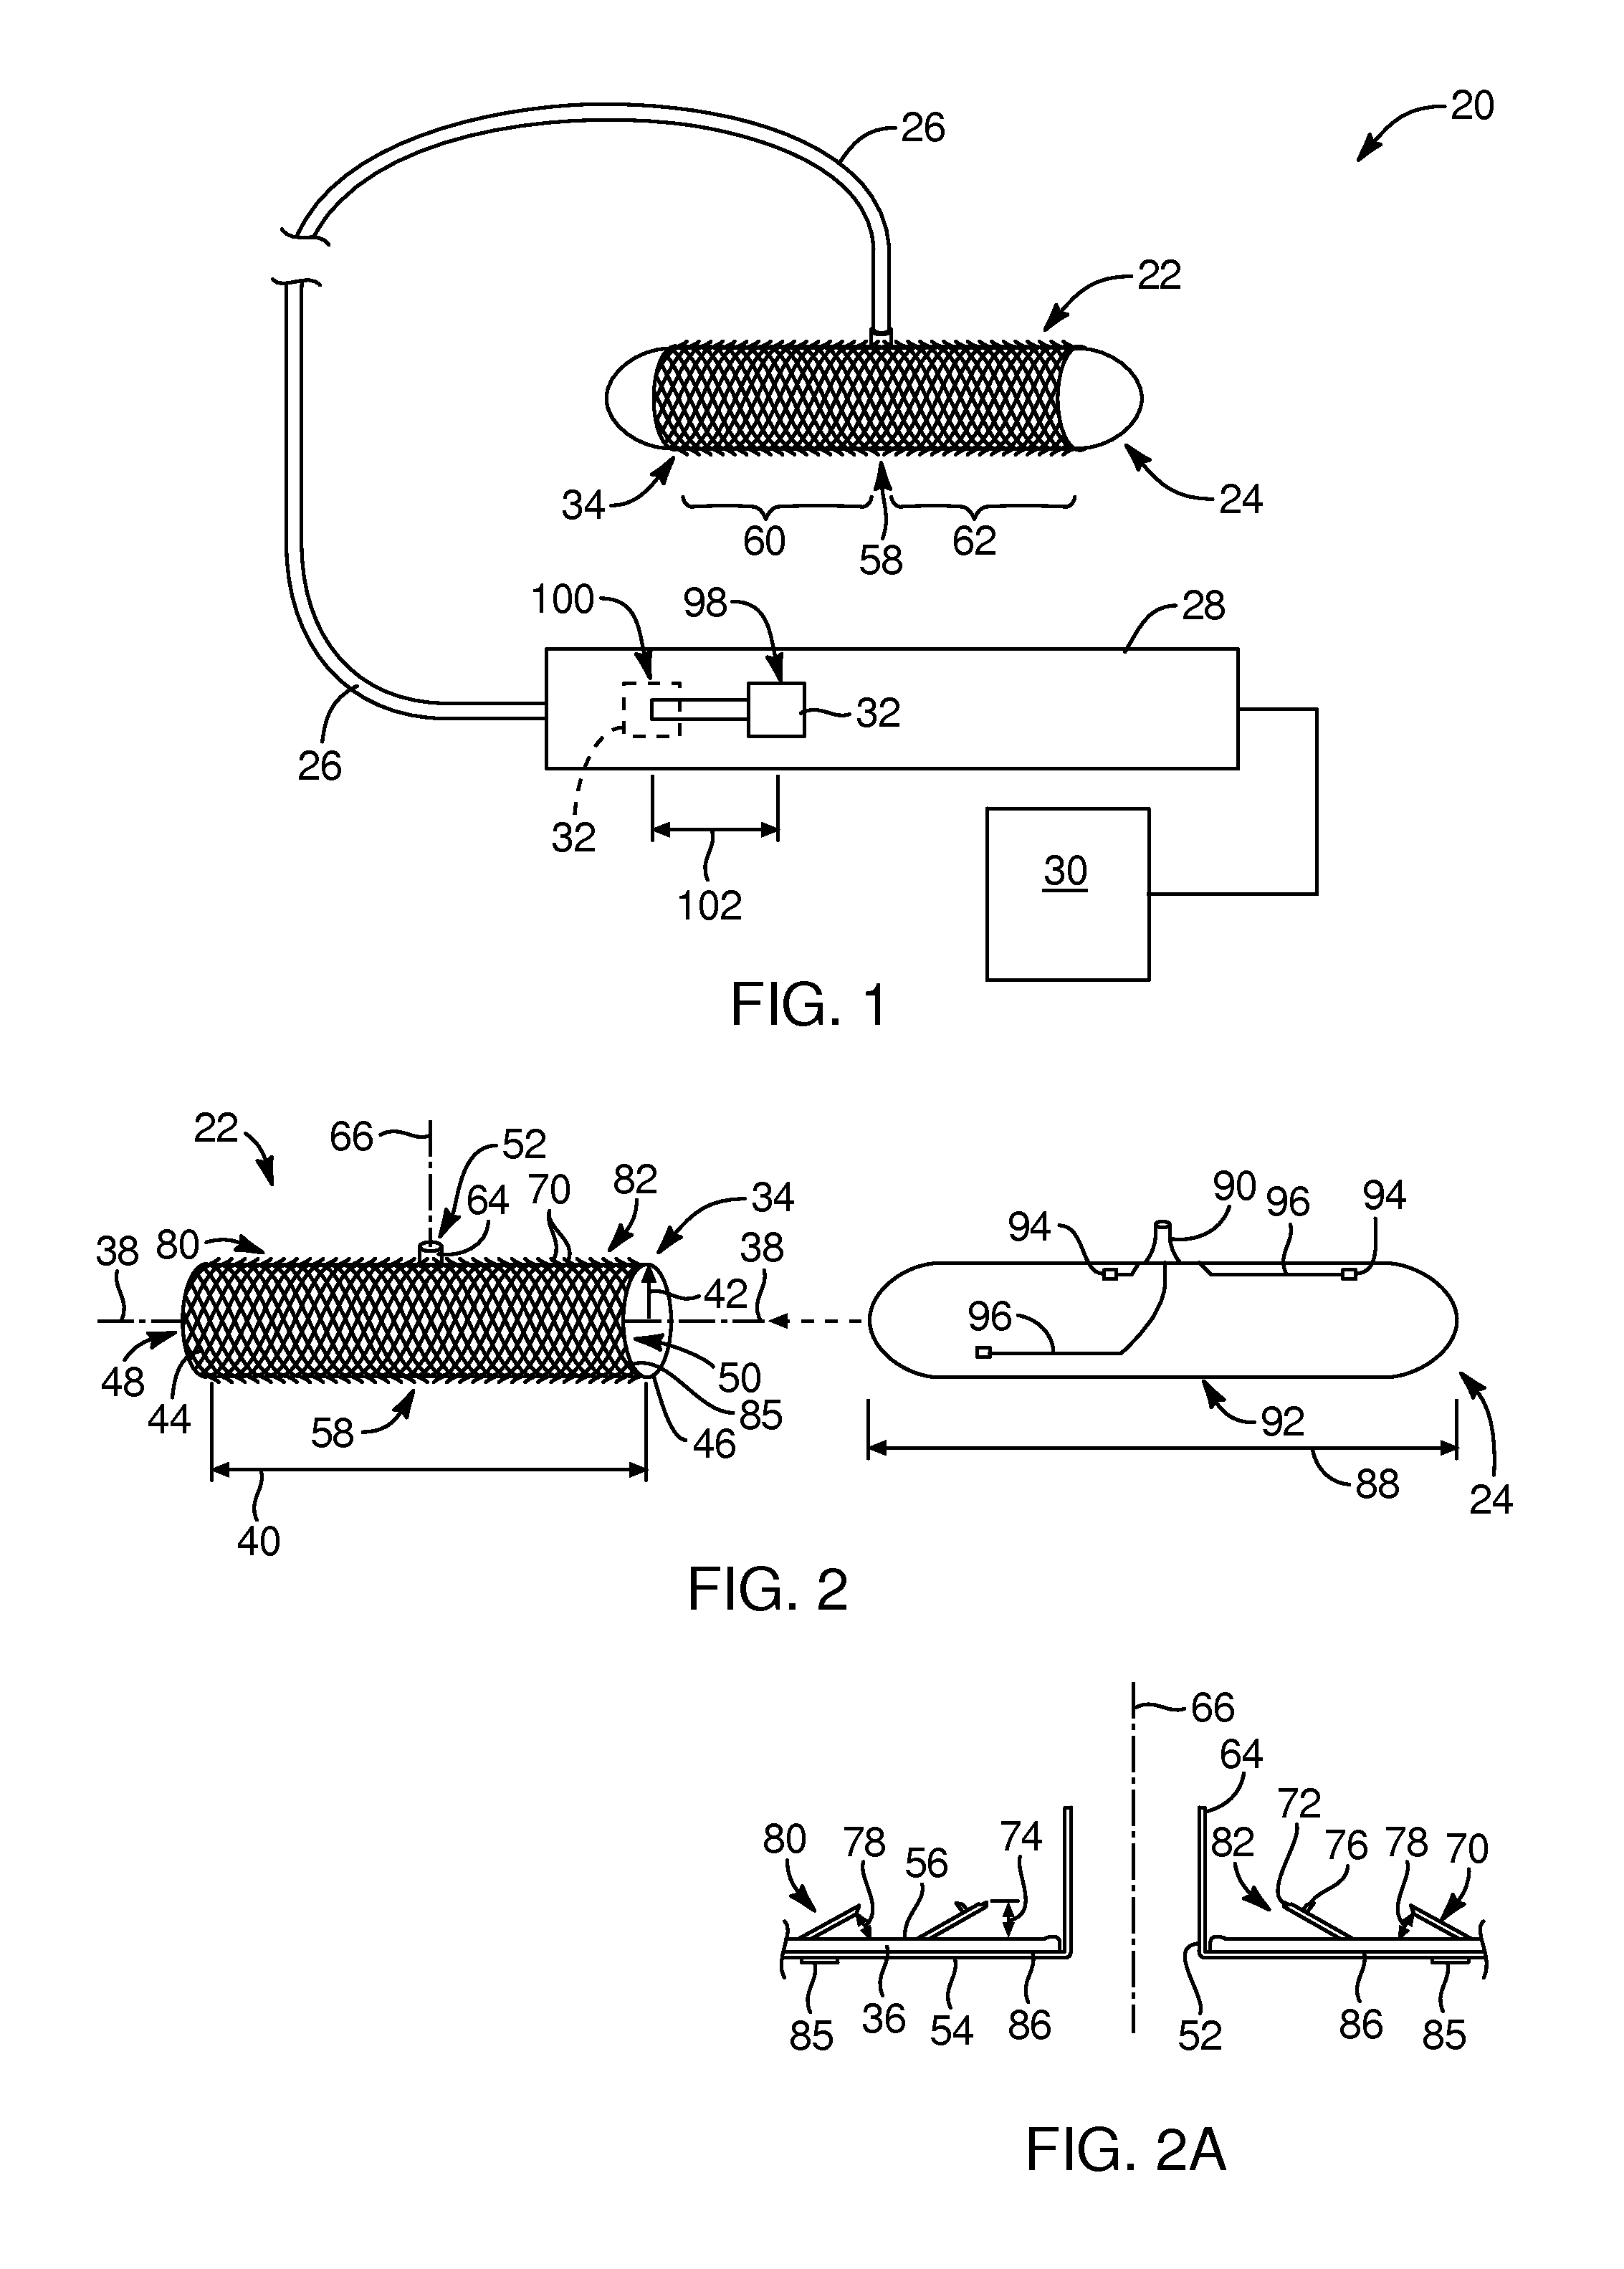 Open surgery anastomosis device, system, and method